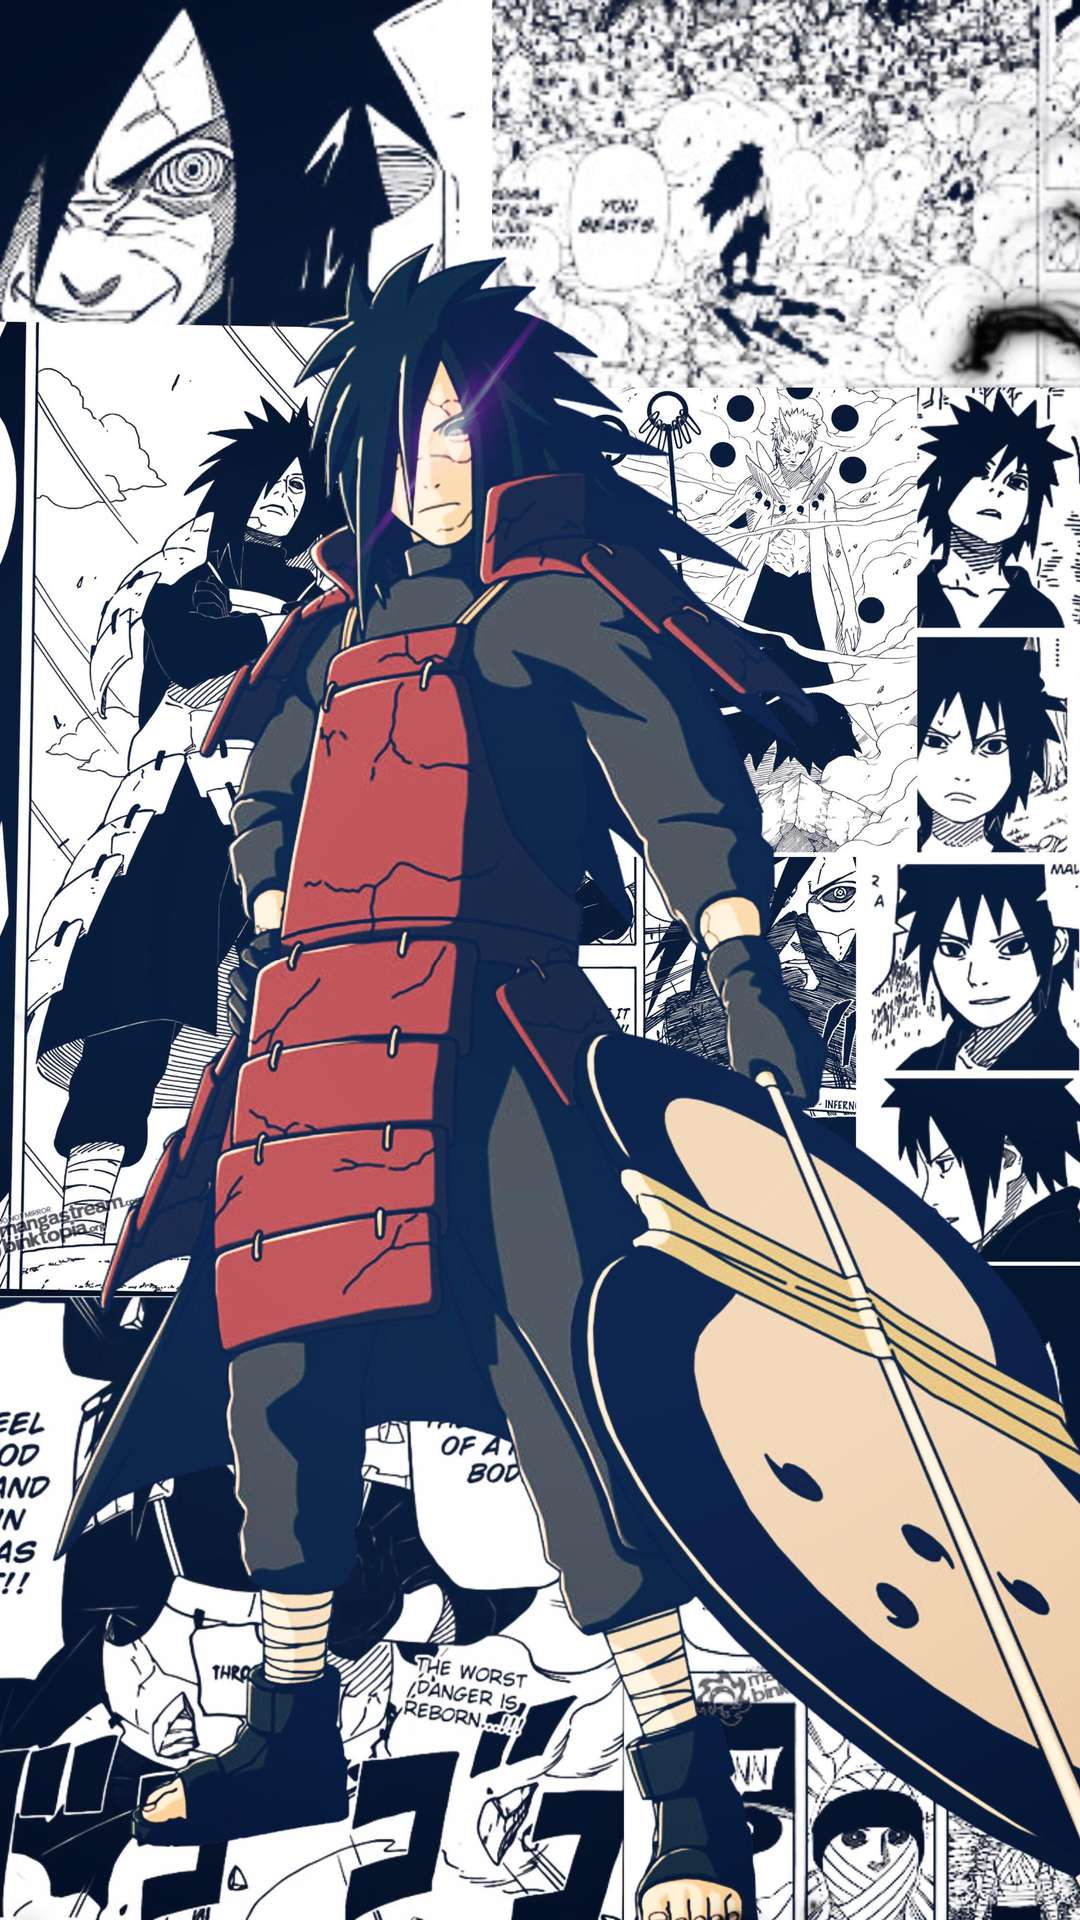 83 Uchiha Madara Wallpapers for iPhone and Android by Christopher Gilbert